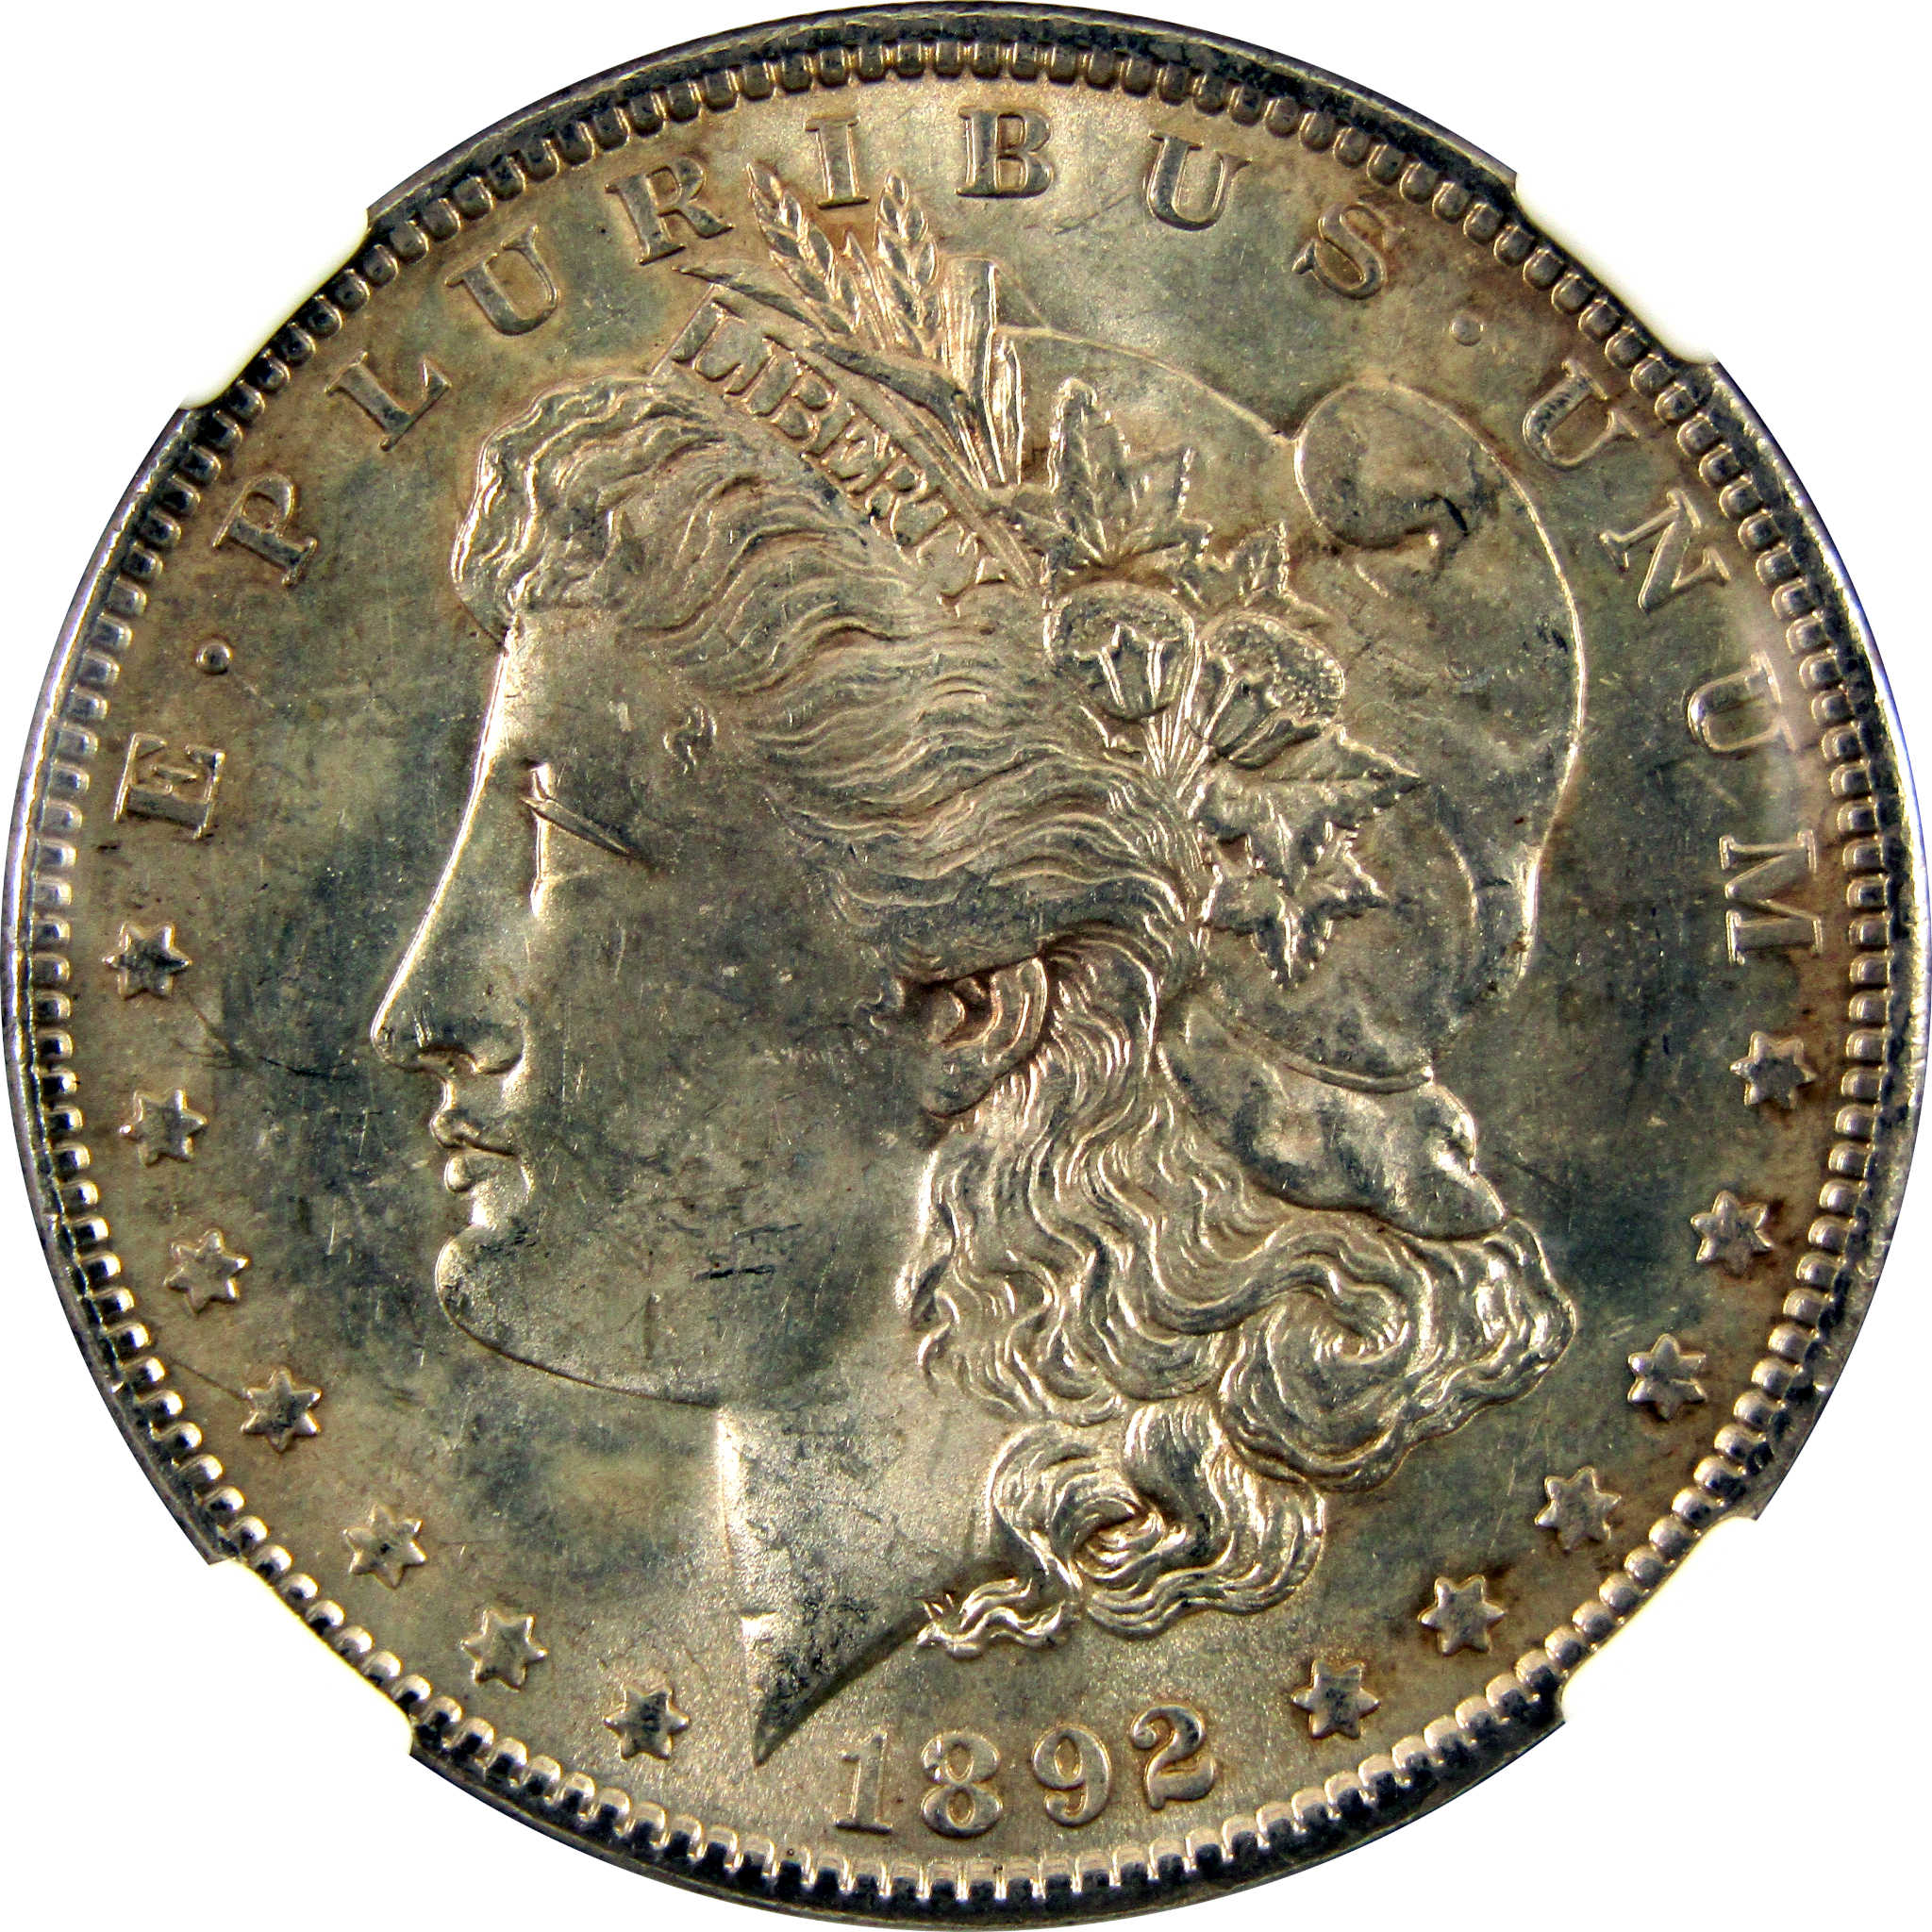 1892 Morgan Dollar MS 62 NGC Silver $1 Uncirculated Coin SKU:I10927 - Morgan coin - Morgan silver dollar - Morgan silver dollar for sale - Profile Coins &amp; Collectibles